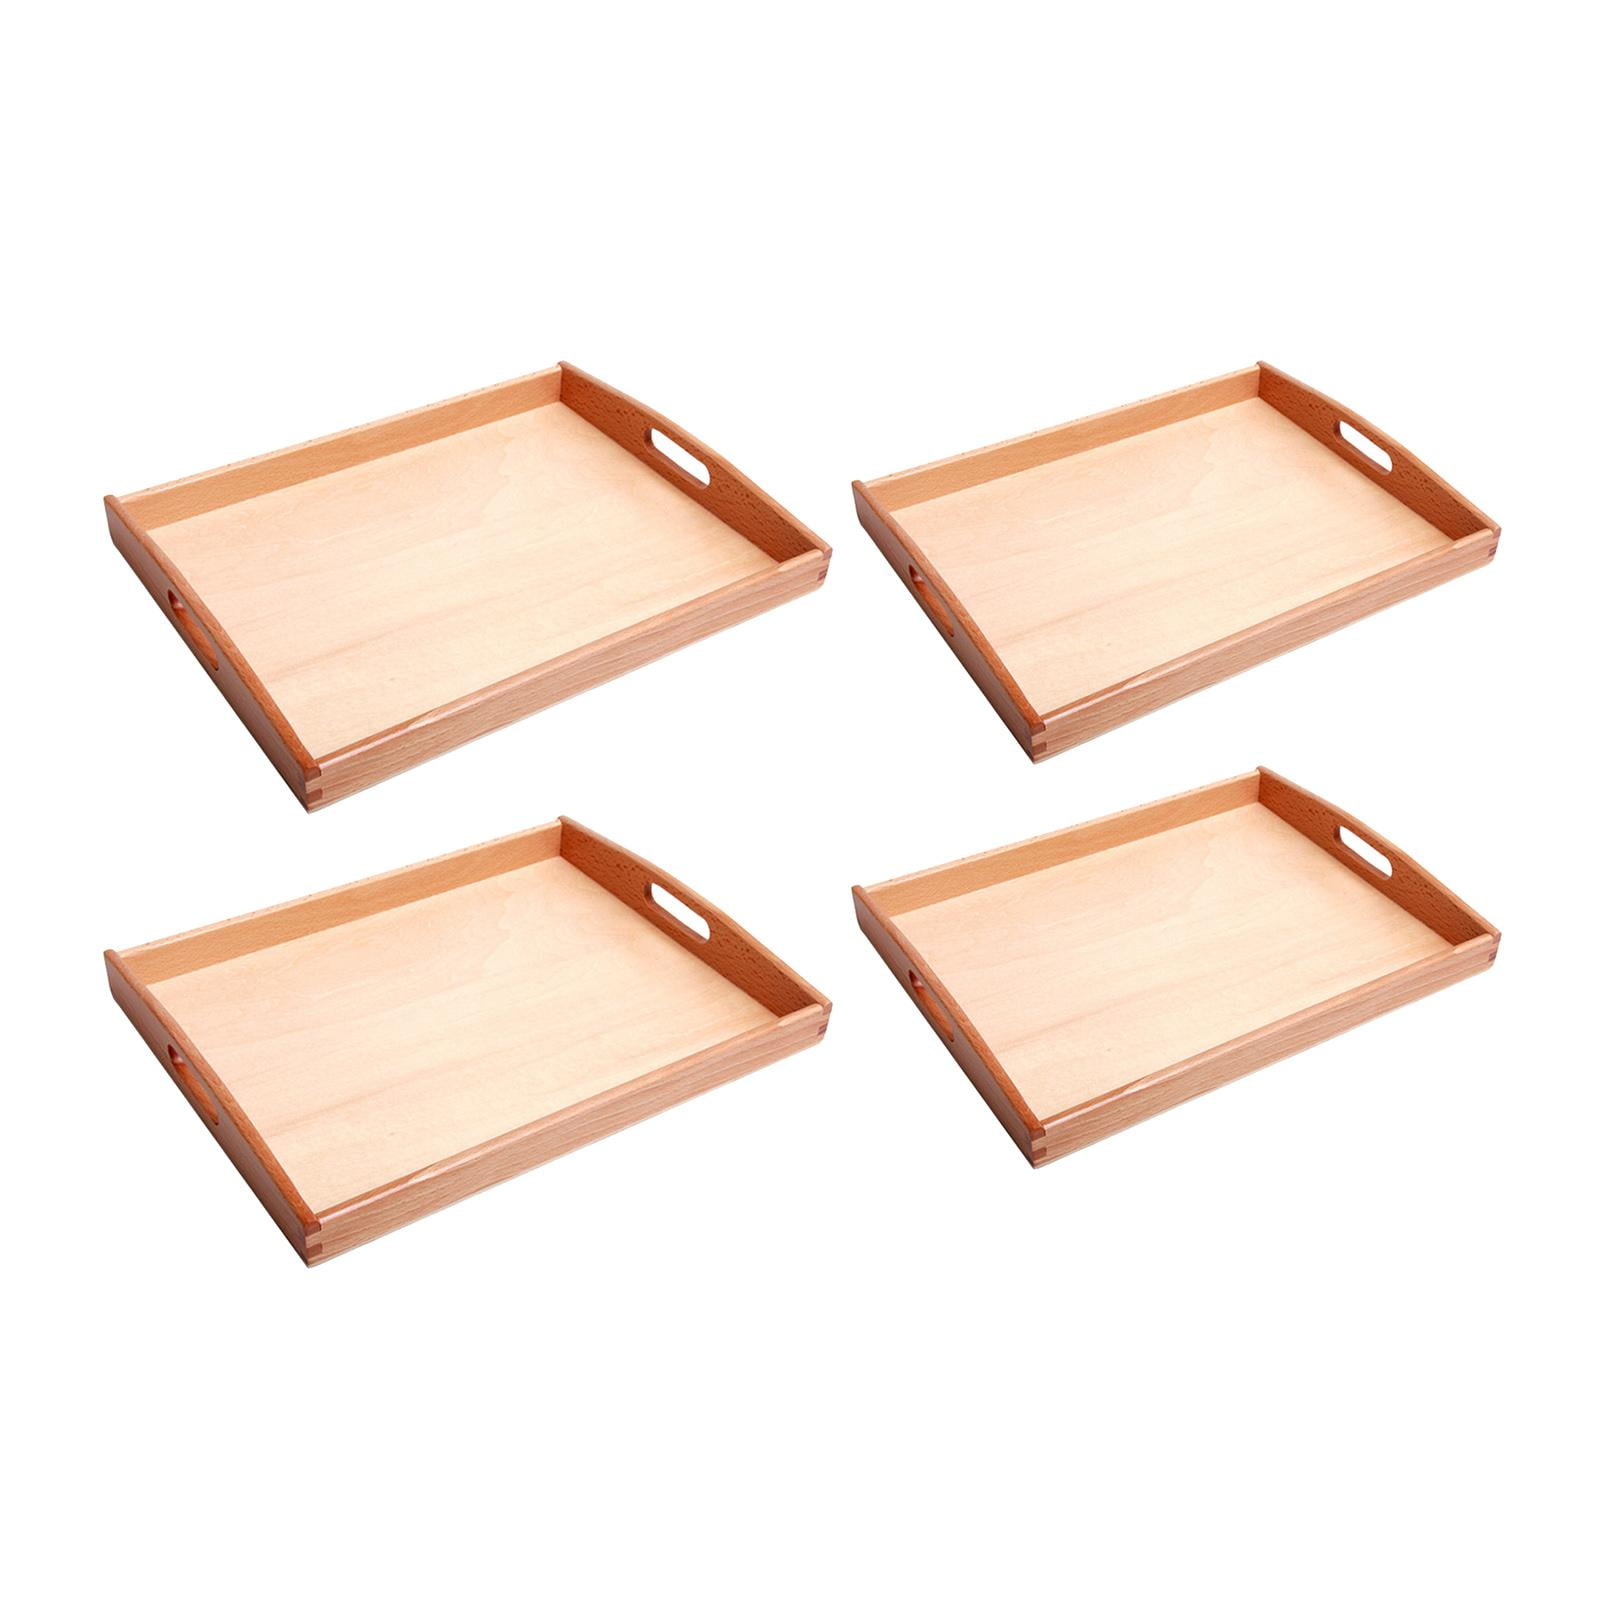 Rectangular Tray Miusco Wooden Serving Platter Assorted Snack Dish Cheese Plate